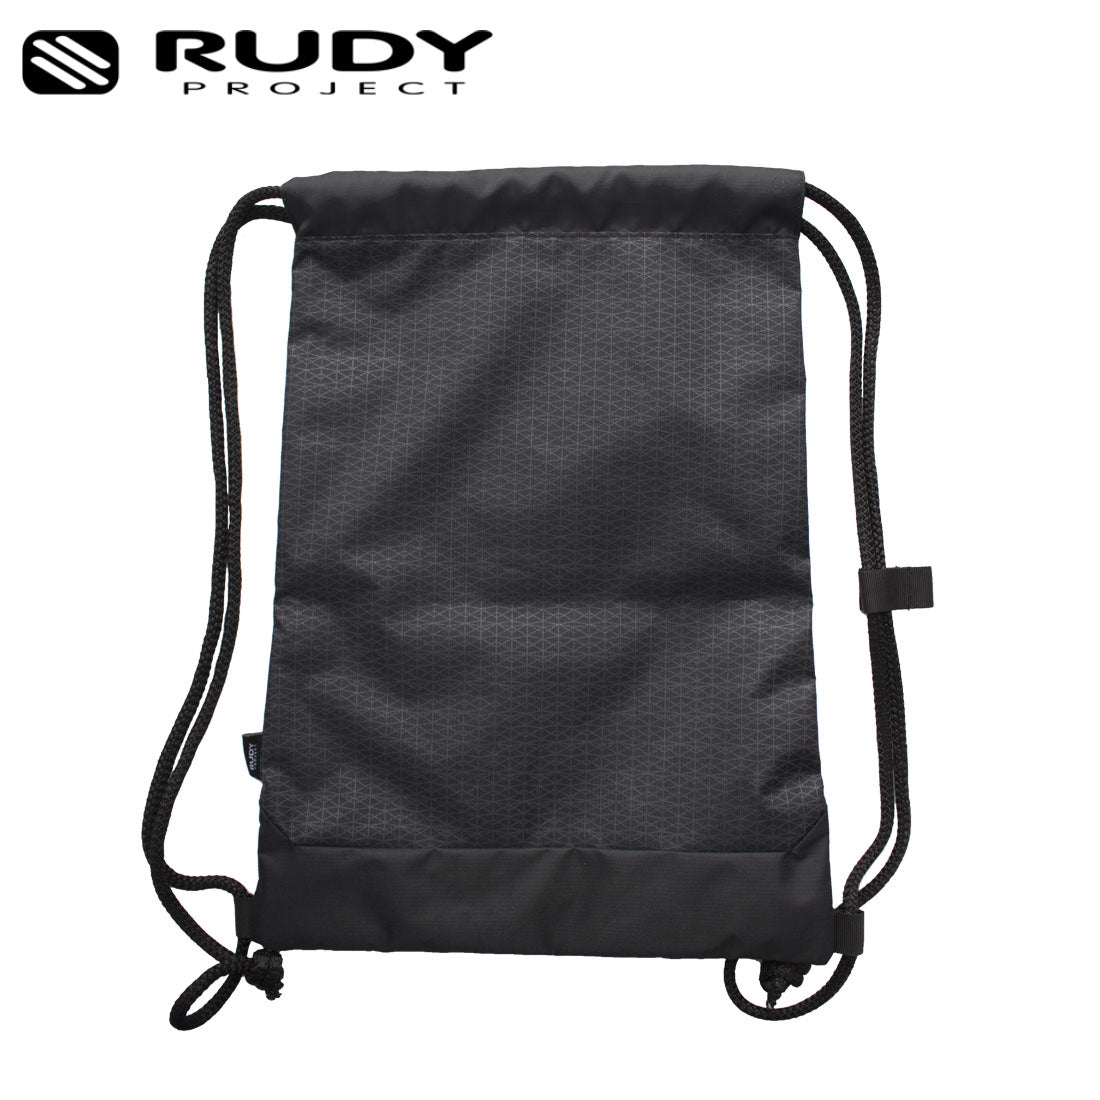 Rudy Project Neo Drawstring Bag in Black for Travel Everyday or Casual